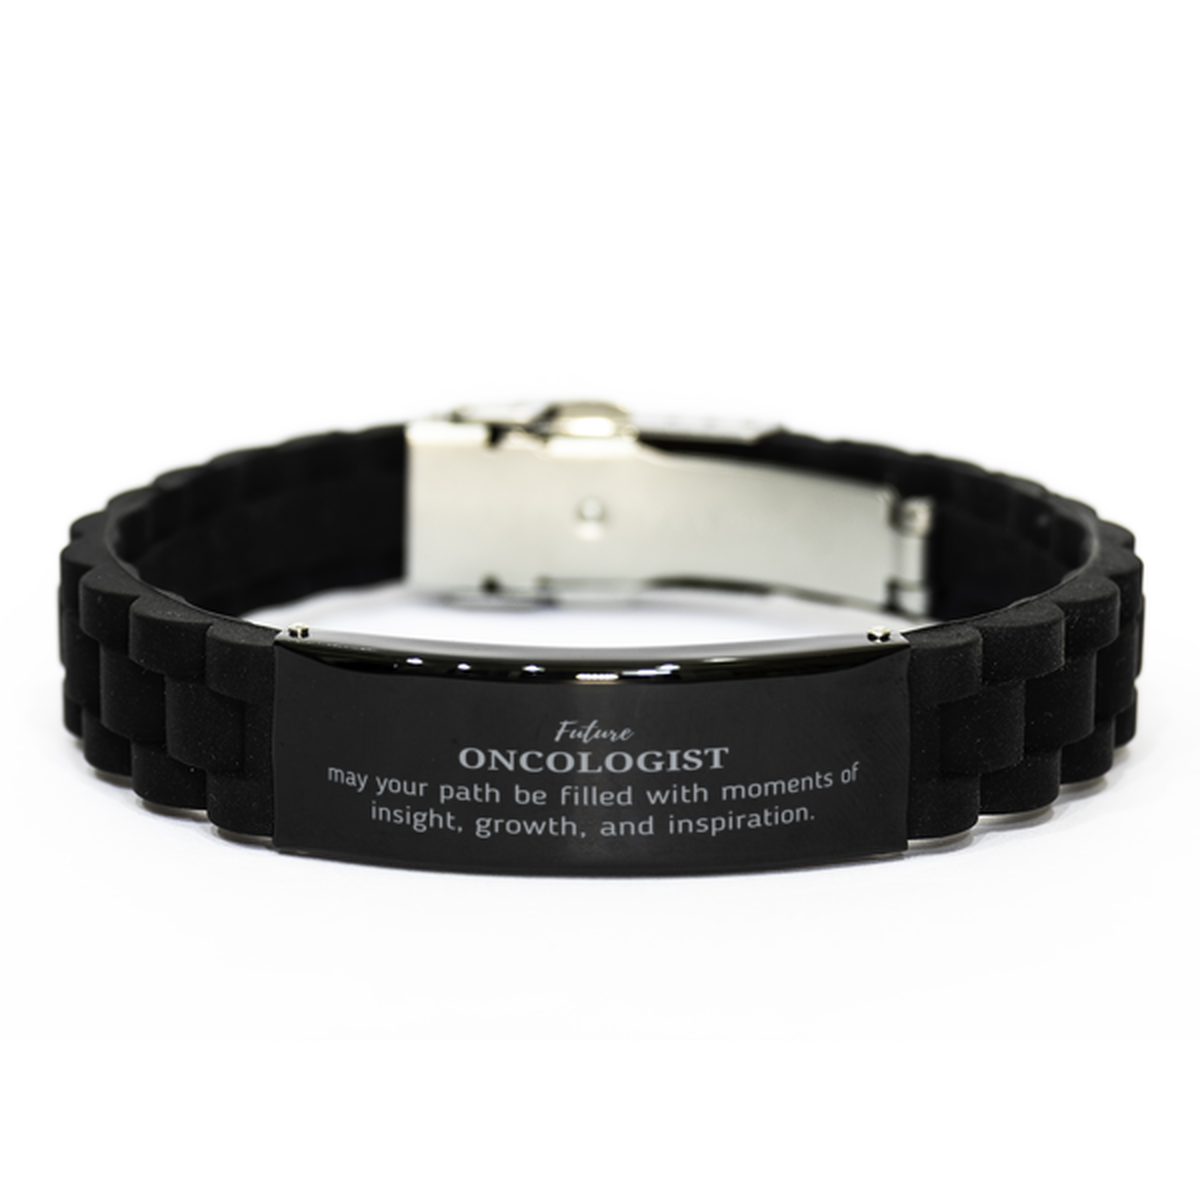 Future Oncologist Gifts, May your path be filled with moments of insight, Graduation Gifts for New Oncologist, Christmas Unique Black Glidelock Clasp Bracelet For Men, Women, Friends